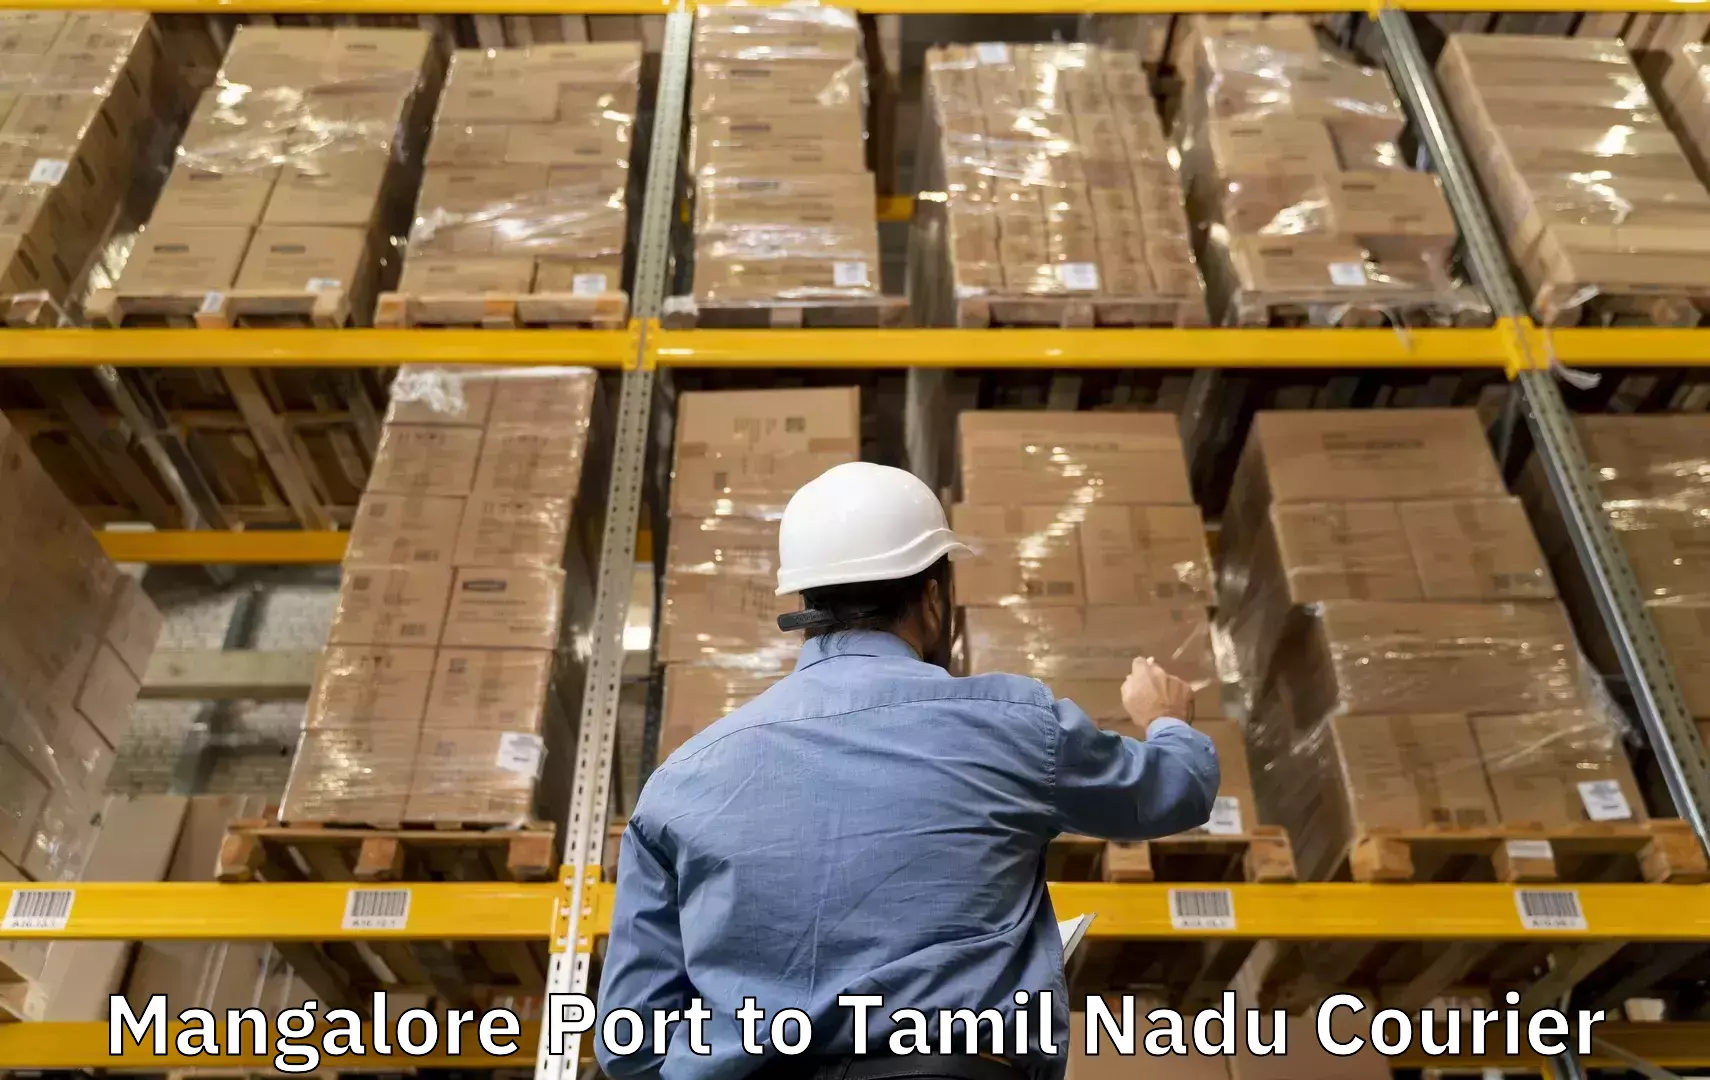 Luggage transport service Mangalore Port to Vellore Institute of Technology